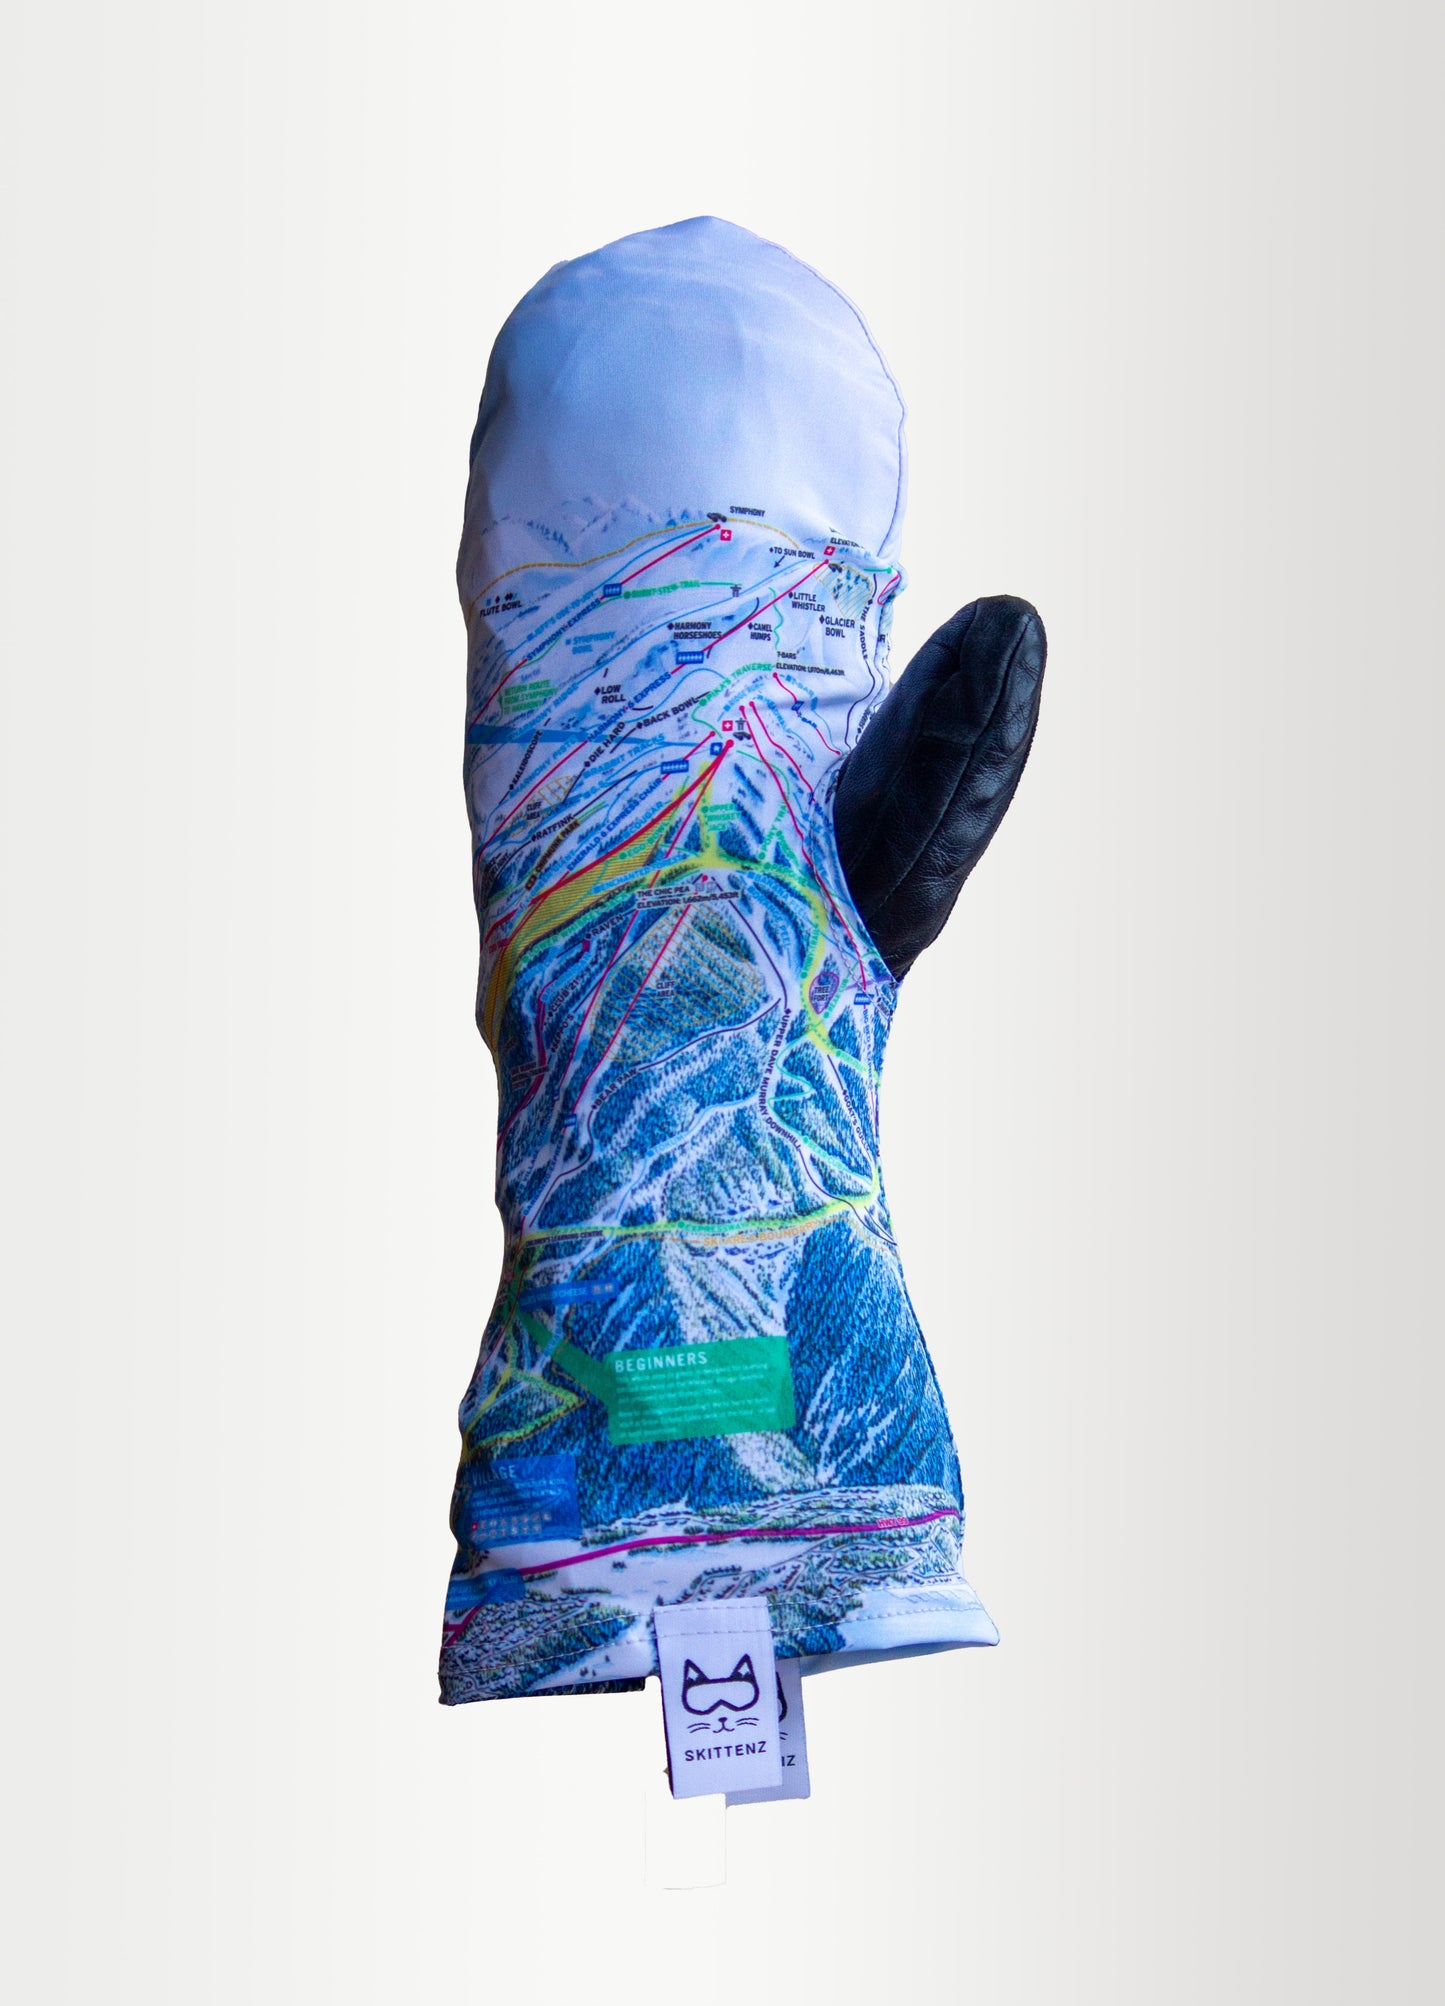 Whistler Blackcomb Ski or Snowboard Trail Map Skins for Mittens or Gloves